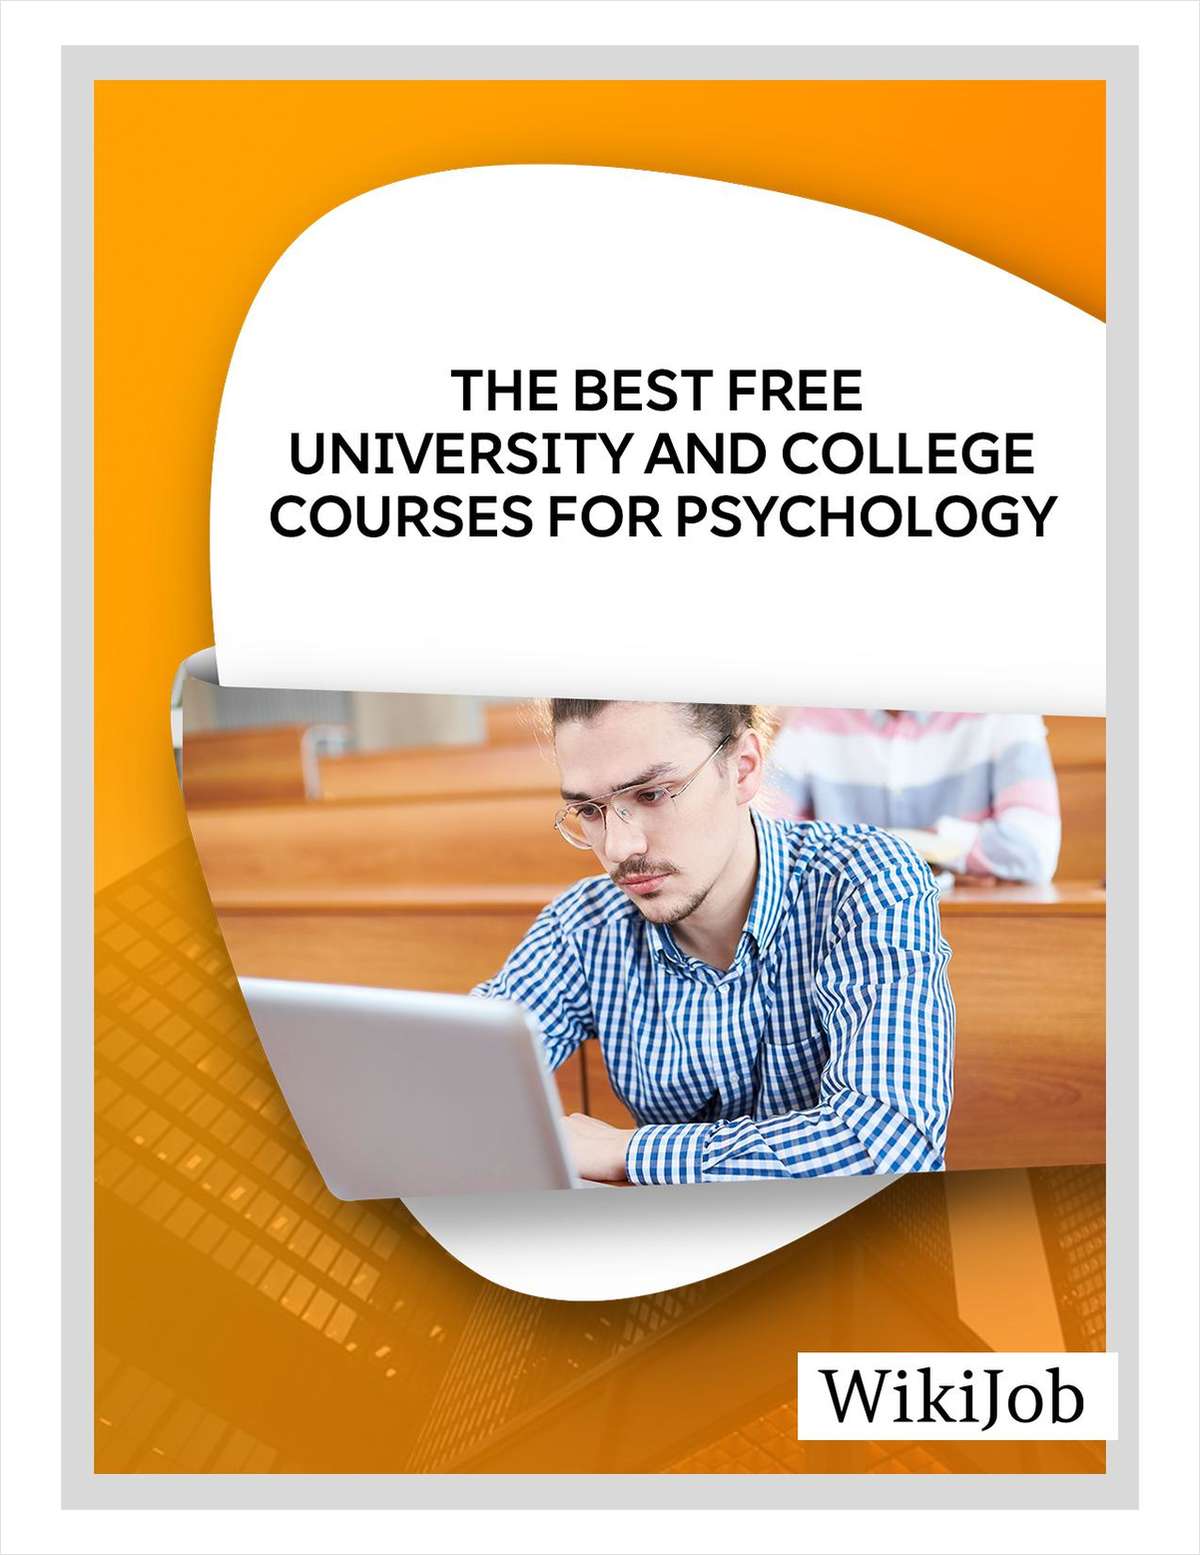 The Best Free University and College Courses for Psychology